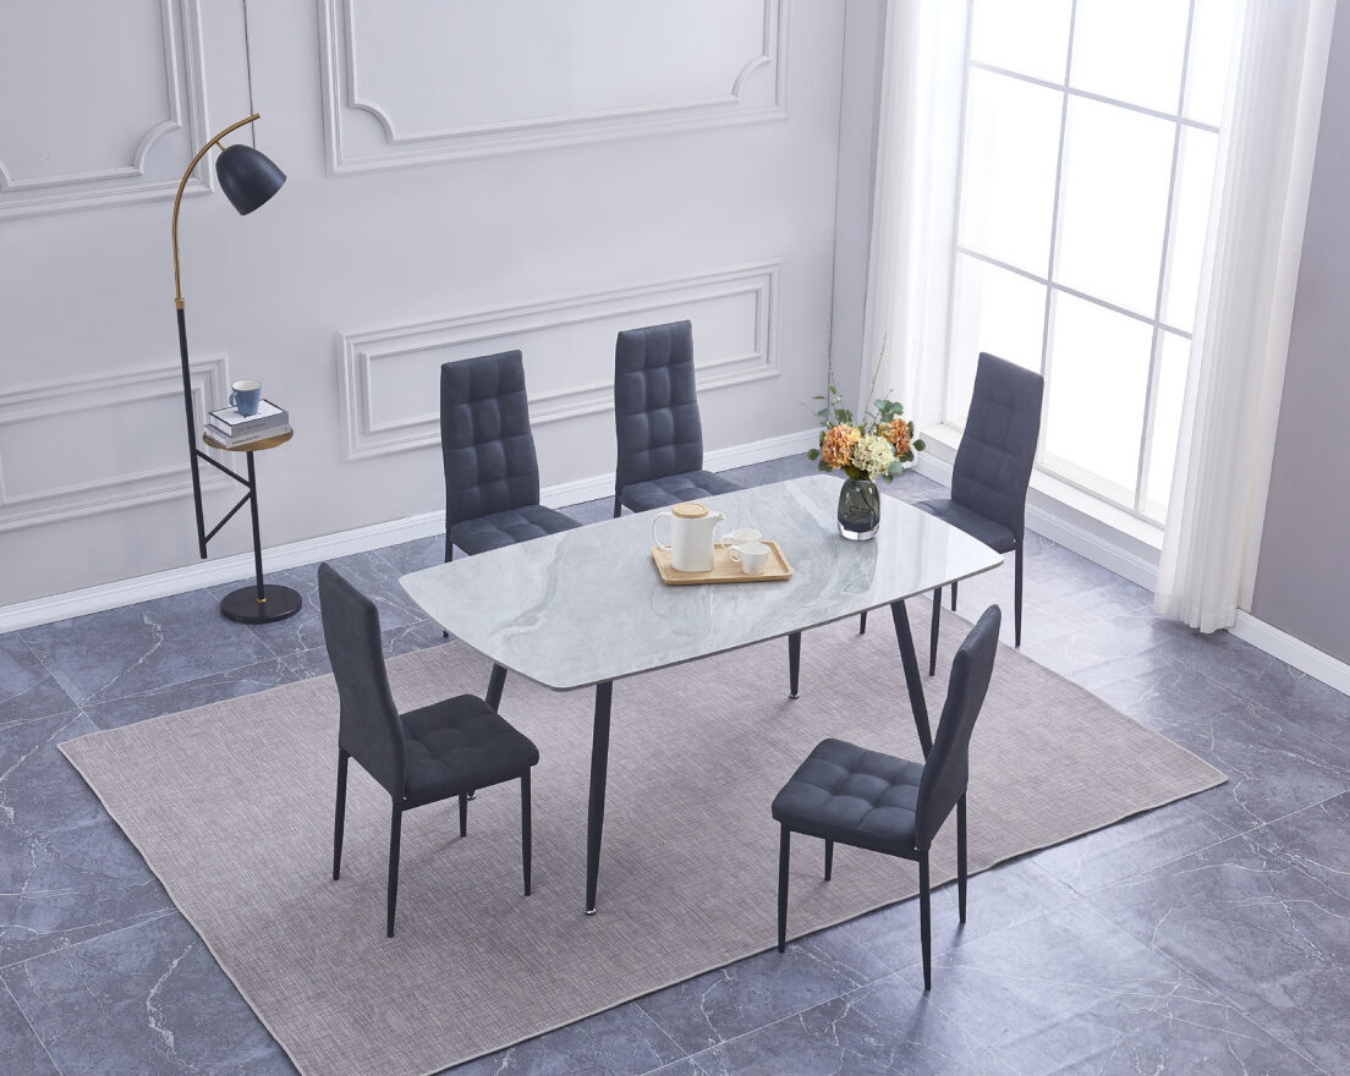 The Yarra Dining Table is perfectly attuned to the idea of smart, elegant and versatile products that cater to all the normal "variables" of a lively home and make daily life simpler and more enjoyable.